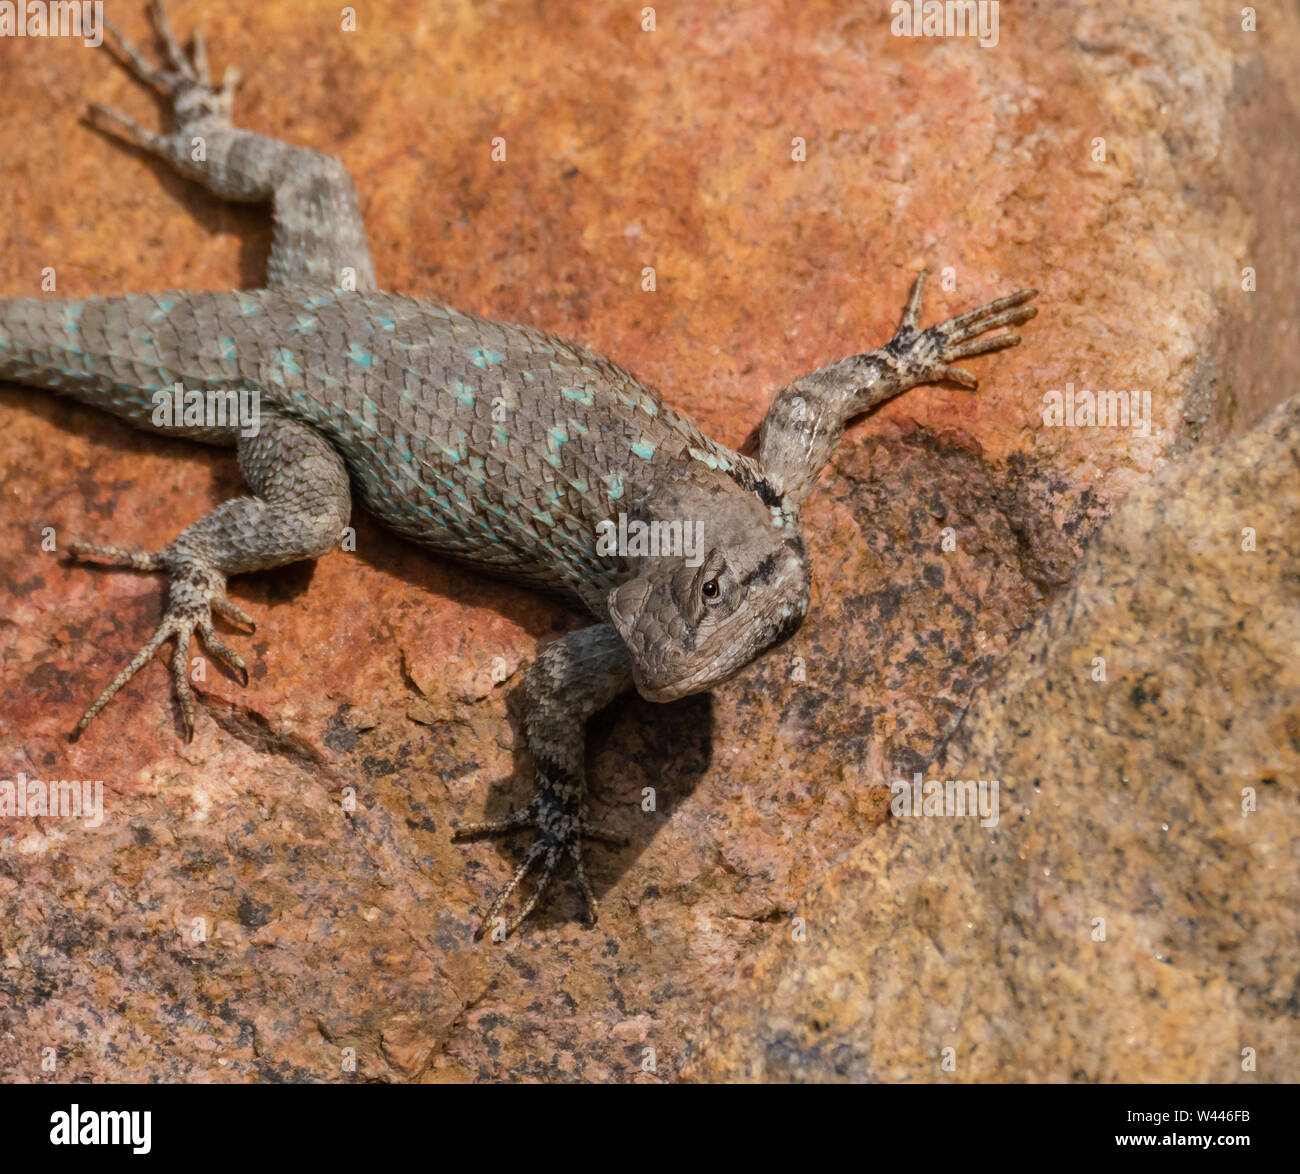 A Lizard with Turquoise Spots Takes in the Waning Sunlight Stock Photo